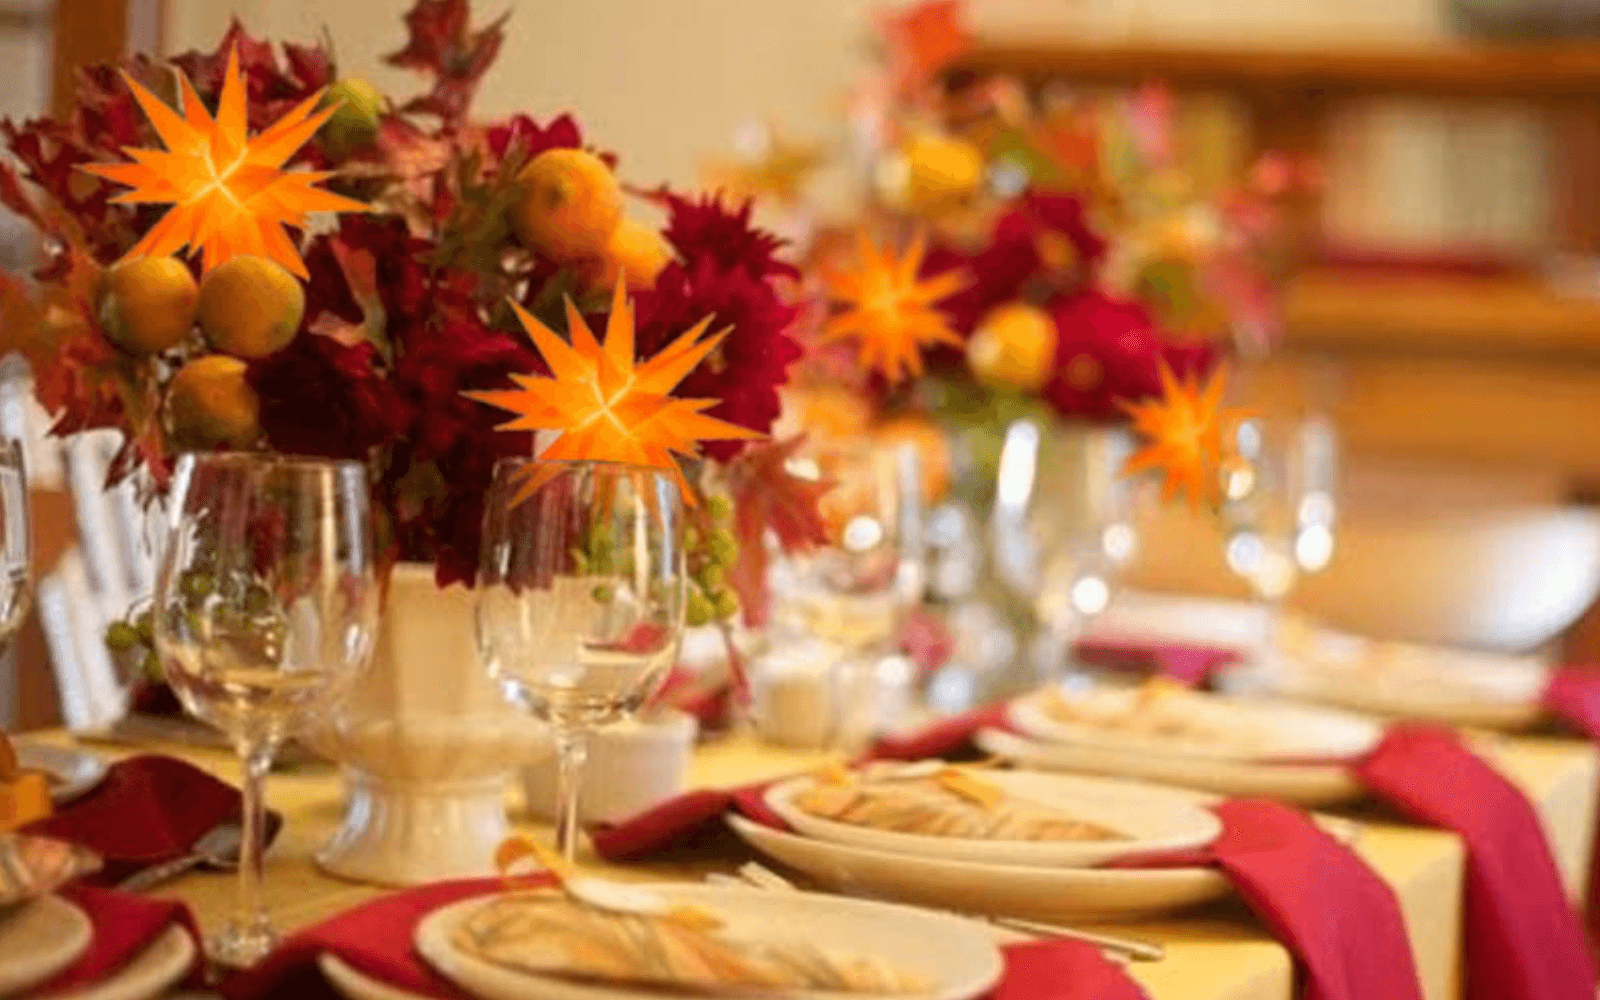 Thanksgiving table set with wine glasses, plates, red napkins, and bouquets with Moravian stars